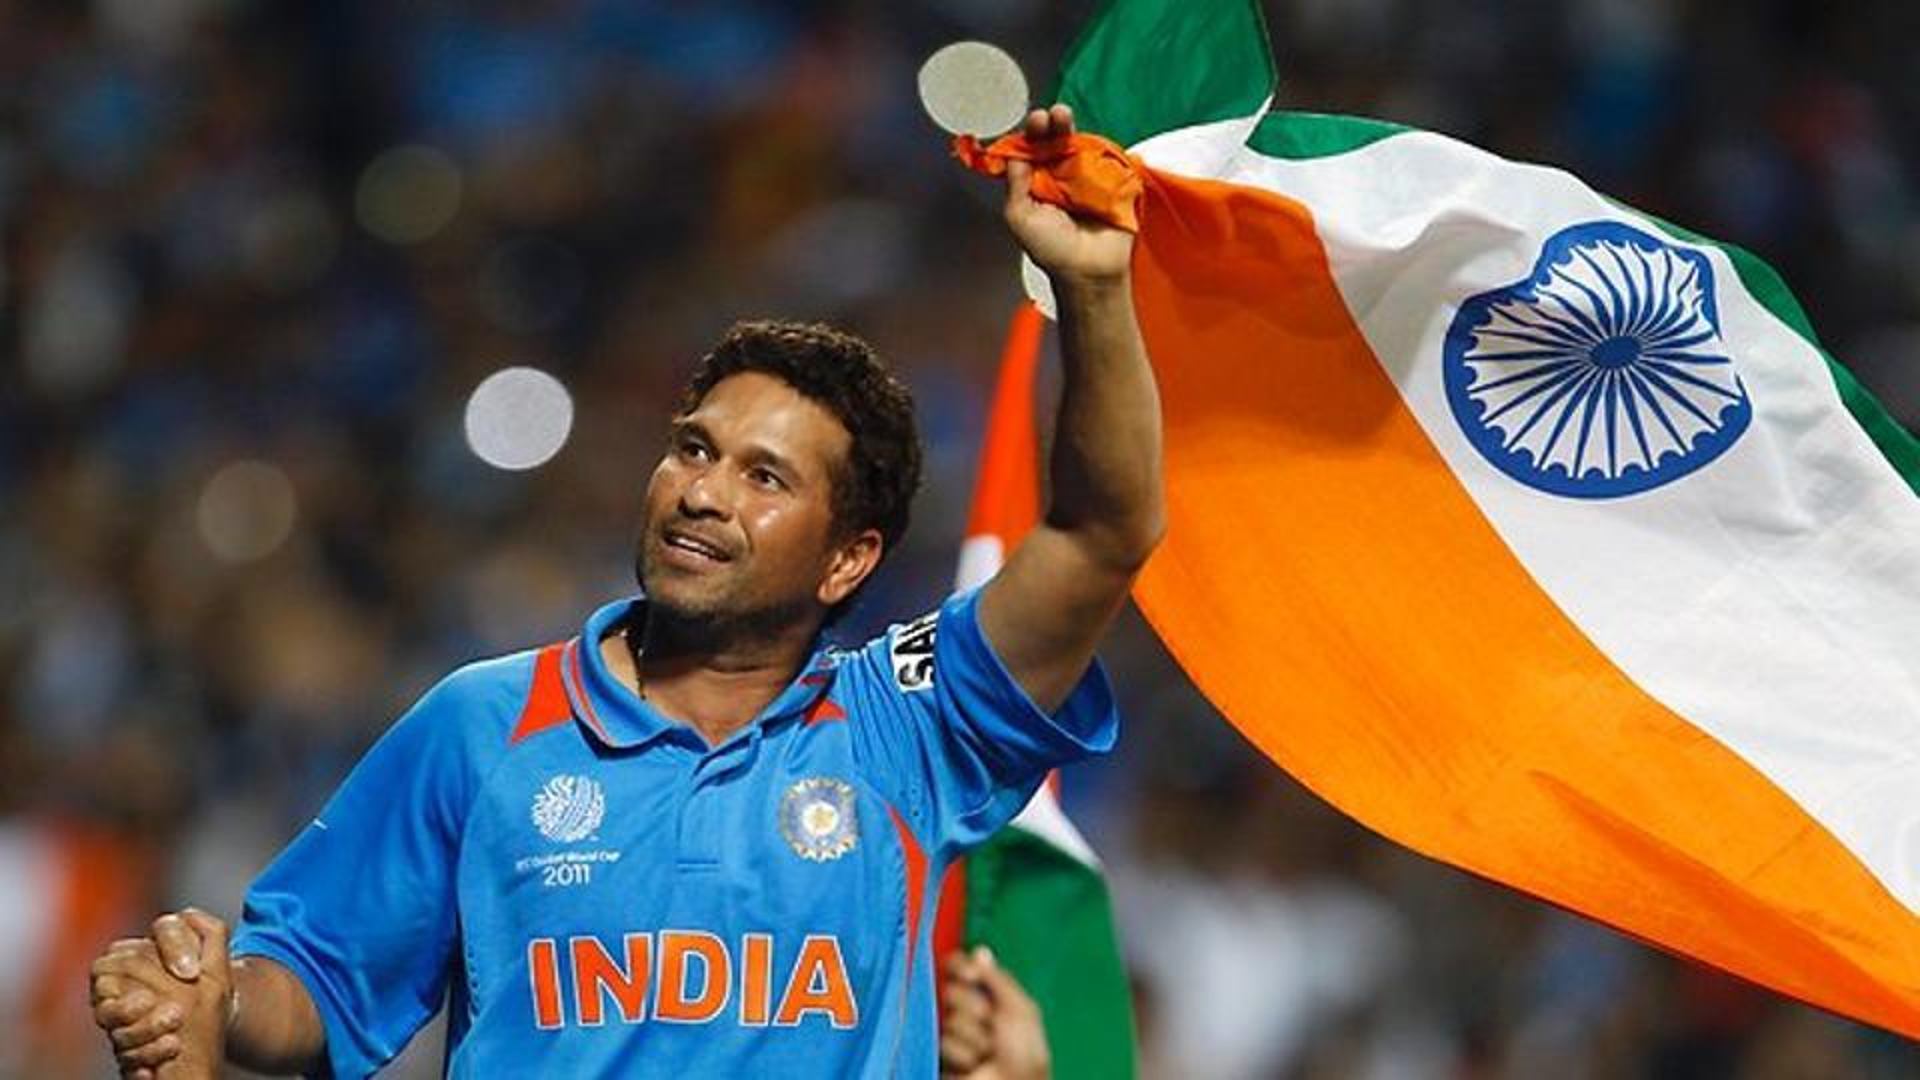 Sachin Tendulkar won his first and only World Cup in 2011 (Courtesy: BCCI/Twitter)